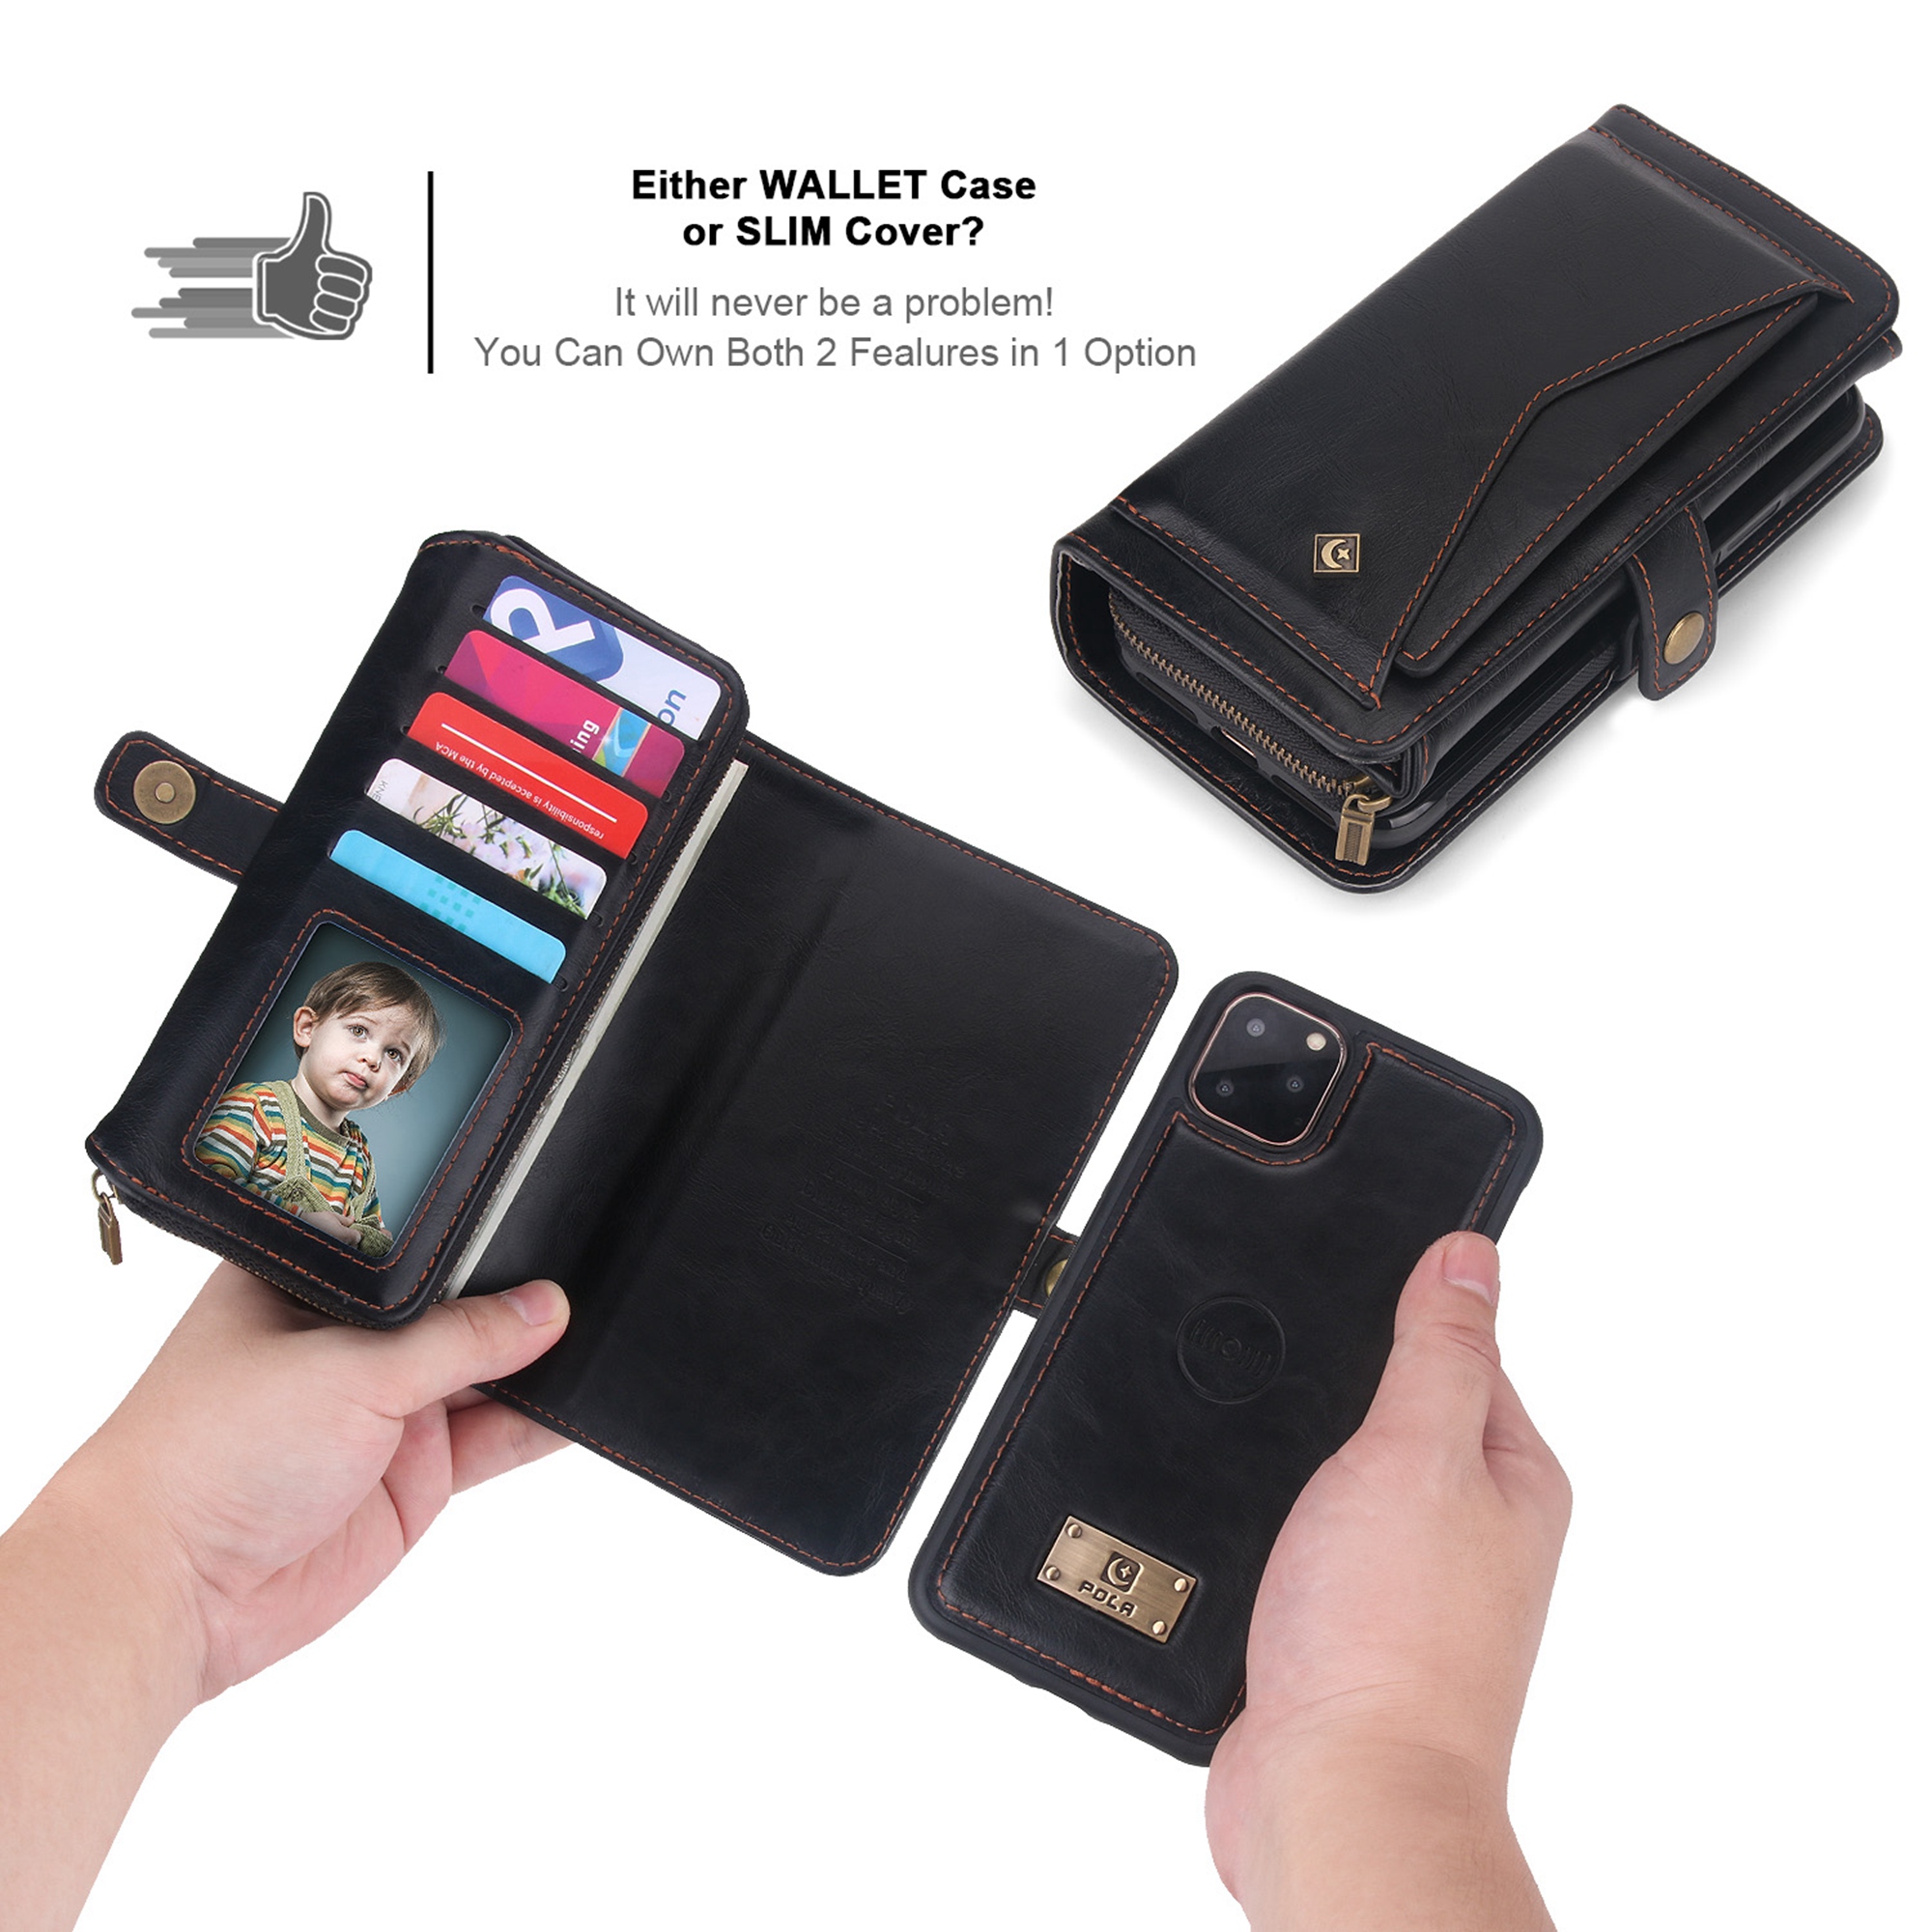 iPhone 11Pro Max 6.5 inch Wallet Case, Dteck 2 in 1 Leather Zipper Purse Multi-Function Tri-fold Wallet Case Detachable Magnetic Phone Cover with 14 Card Slots Money Pocket For iPhone 11 Pro Max,Black - image 2 of 11